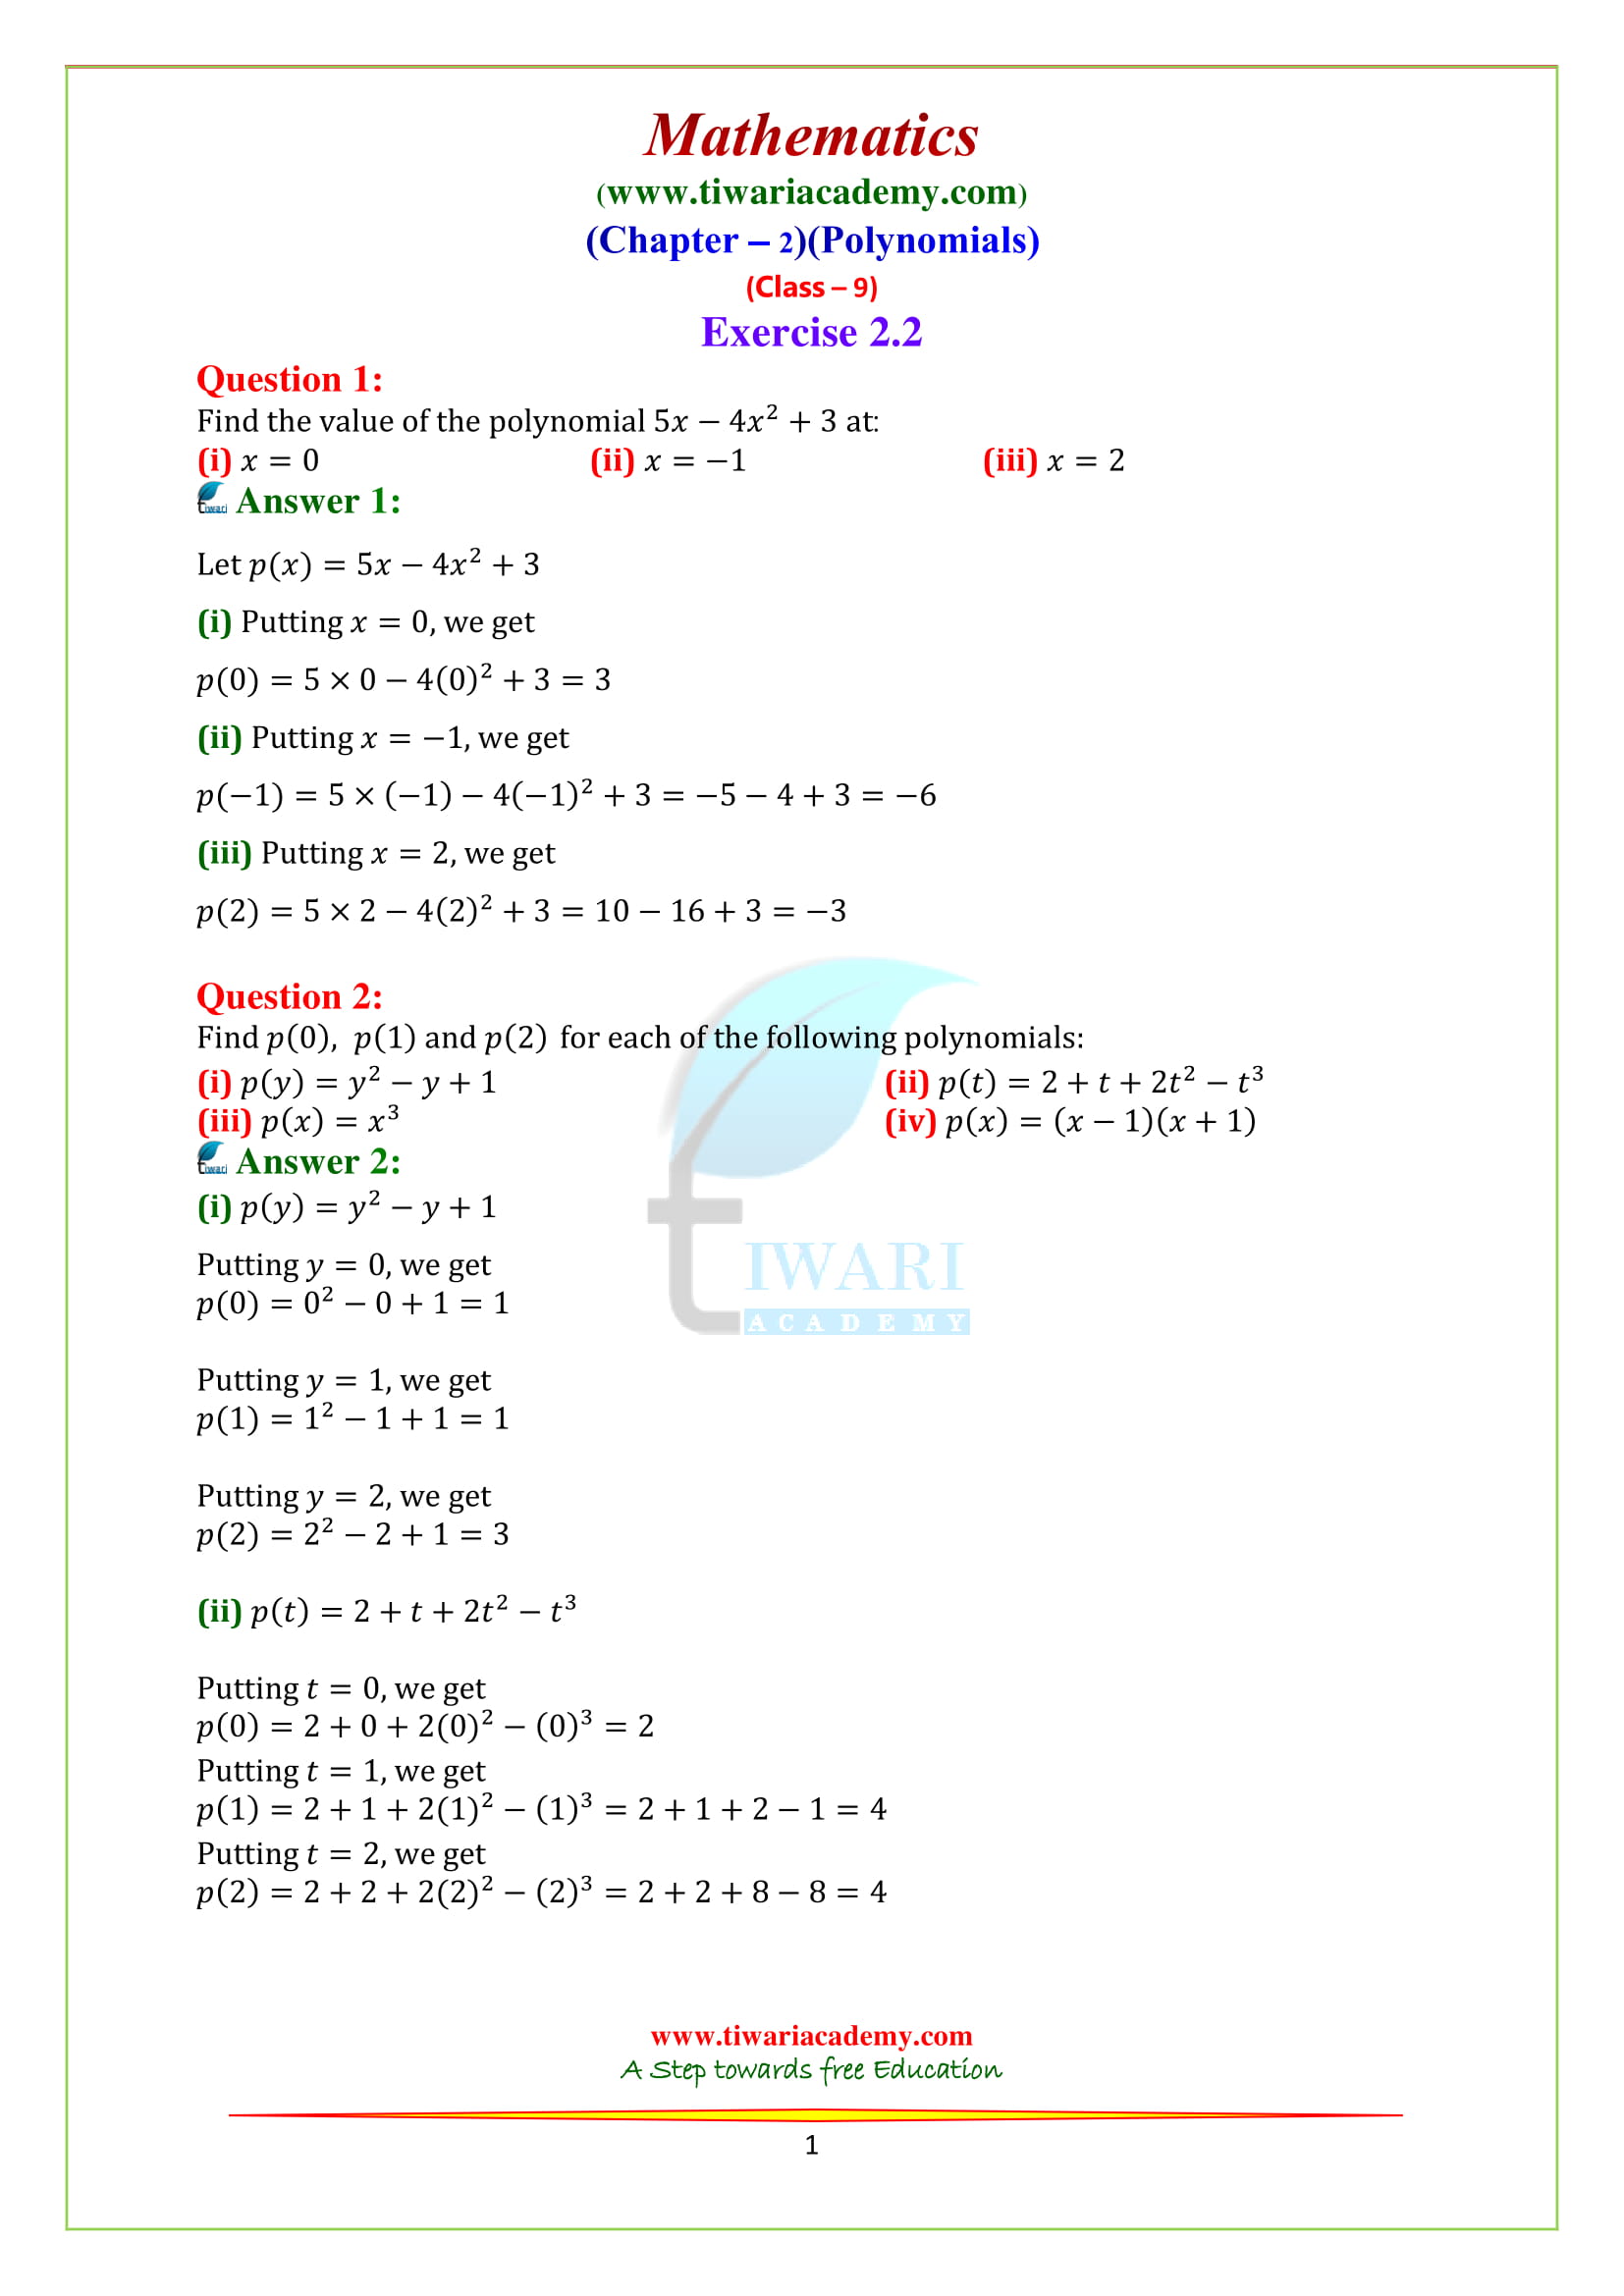 NCERT Solutions for class 9 Maths chapter 2 exercise 2.2 English medium